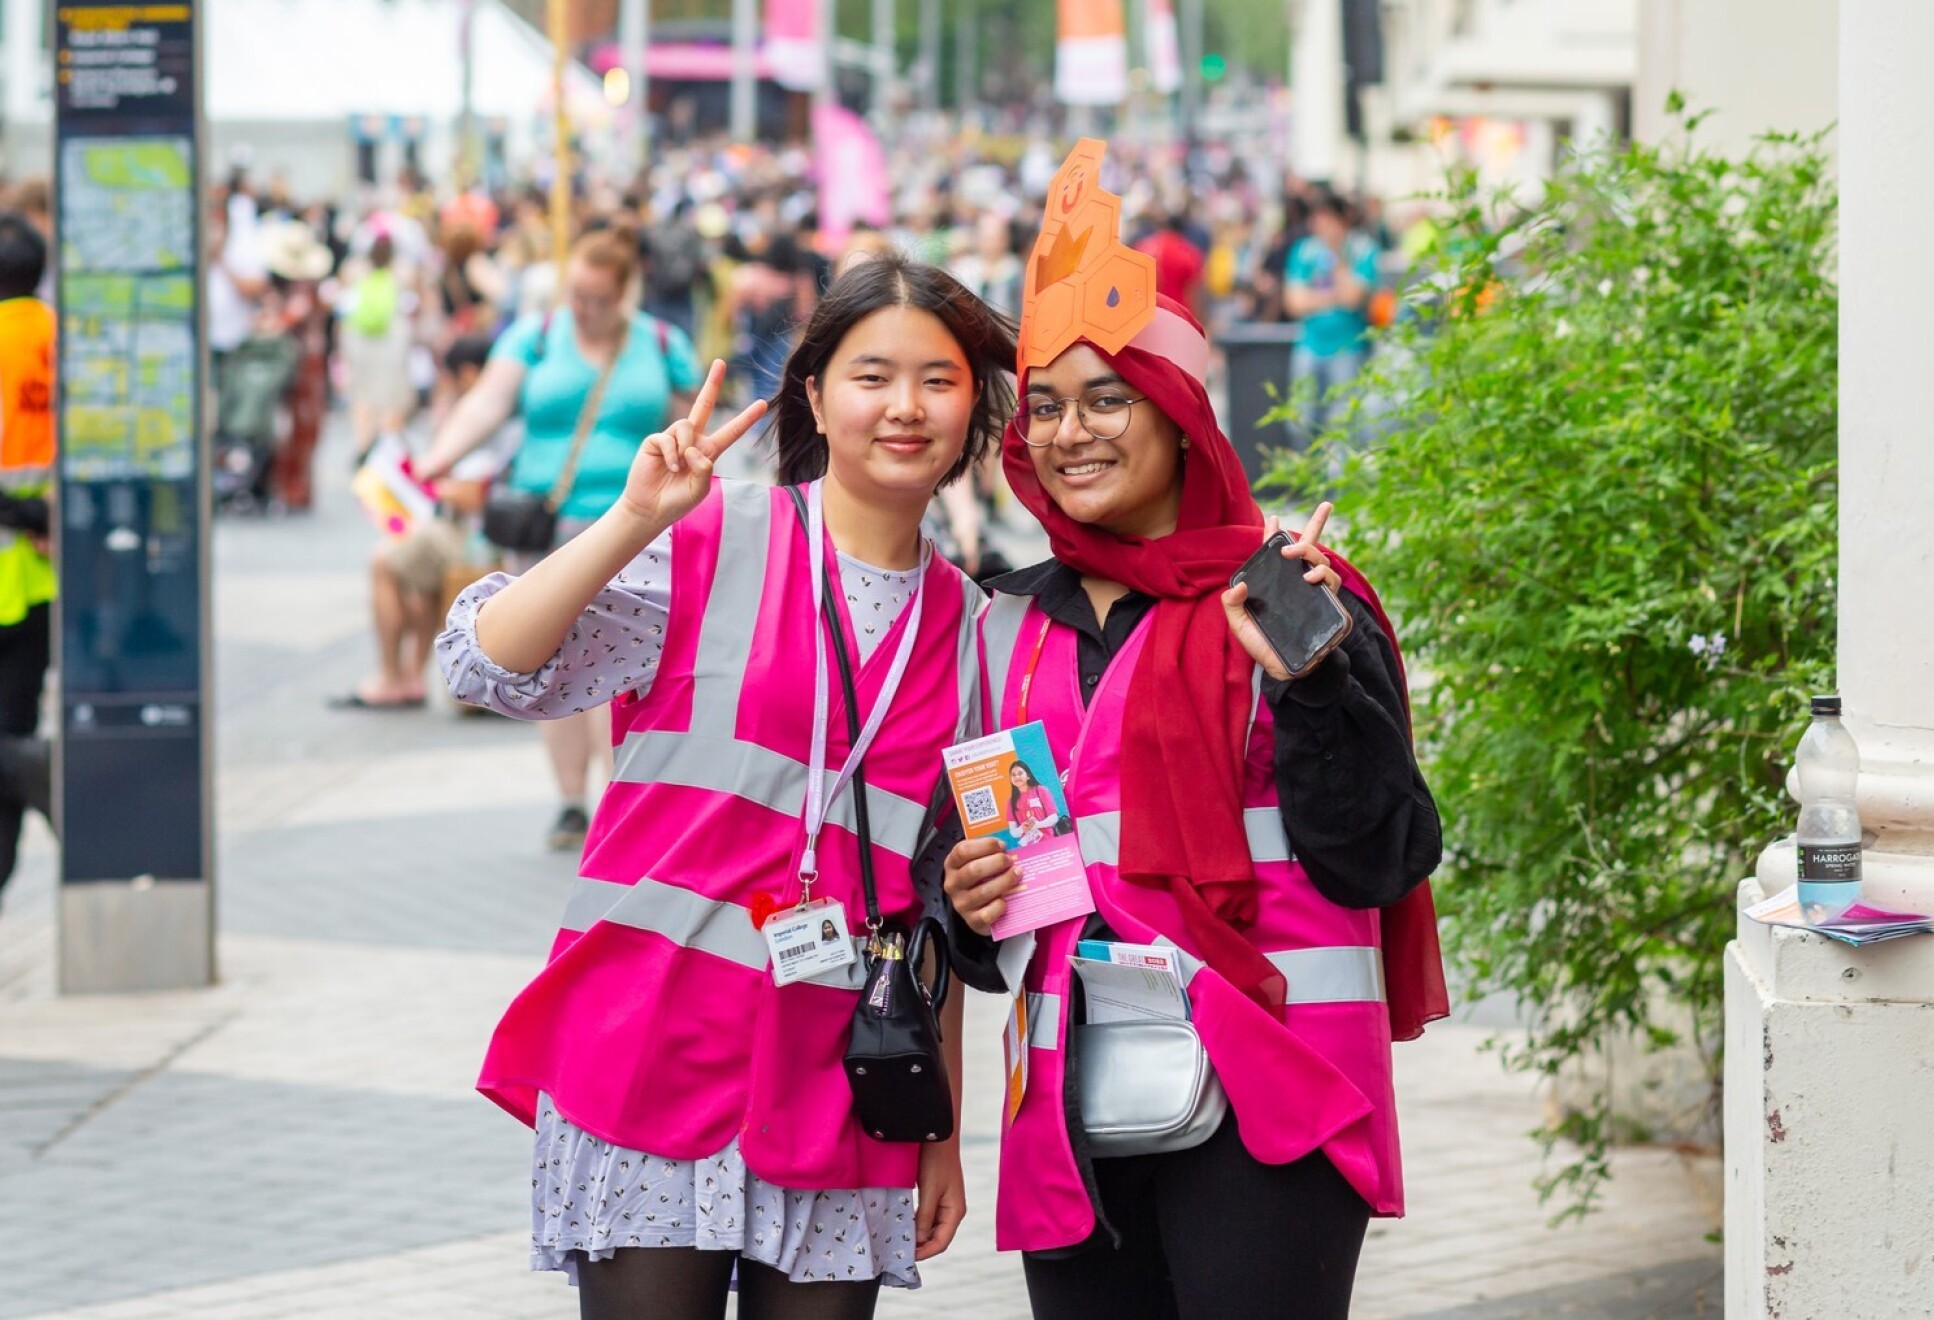 Volunteers at Great Exhibition Road Festival